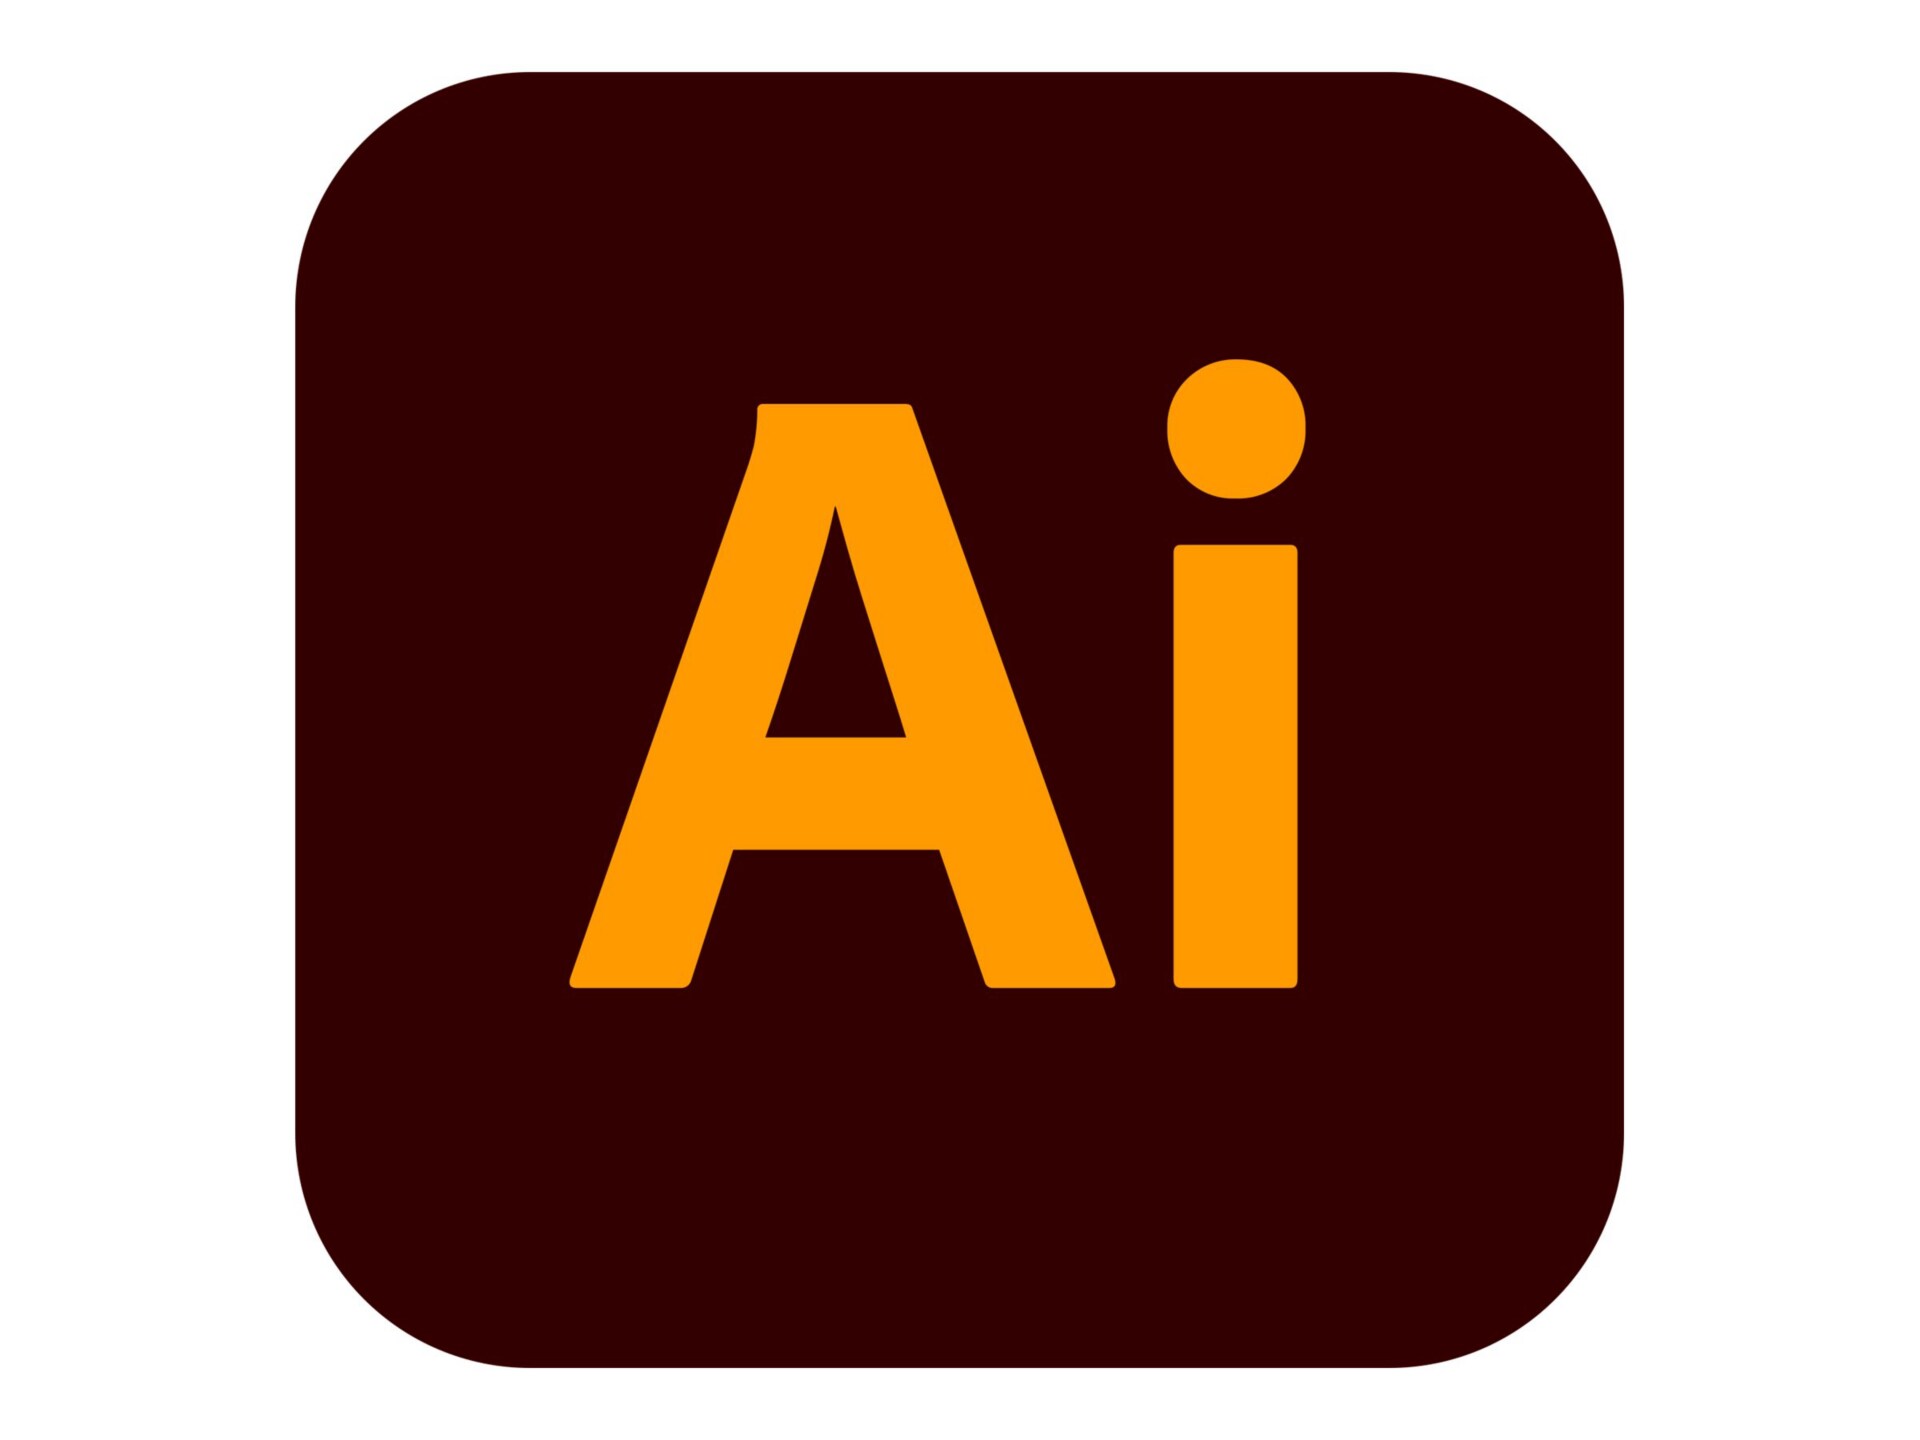 Adobe Illustrator CC for teams - Subscription New (26 months) - 1 named use